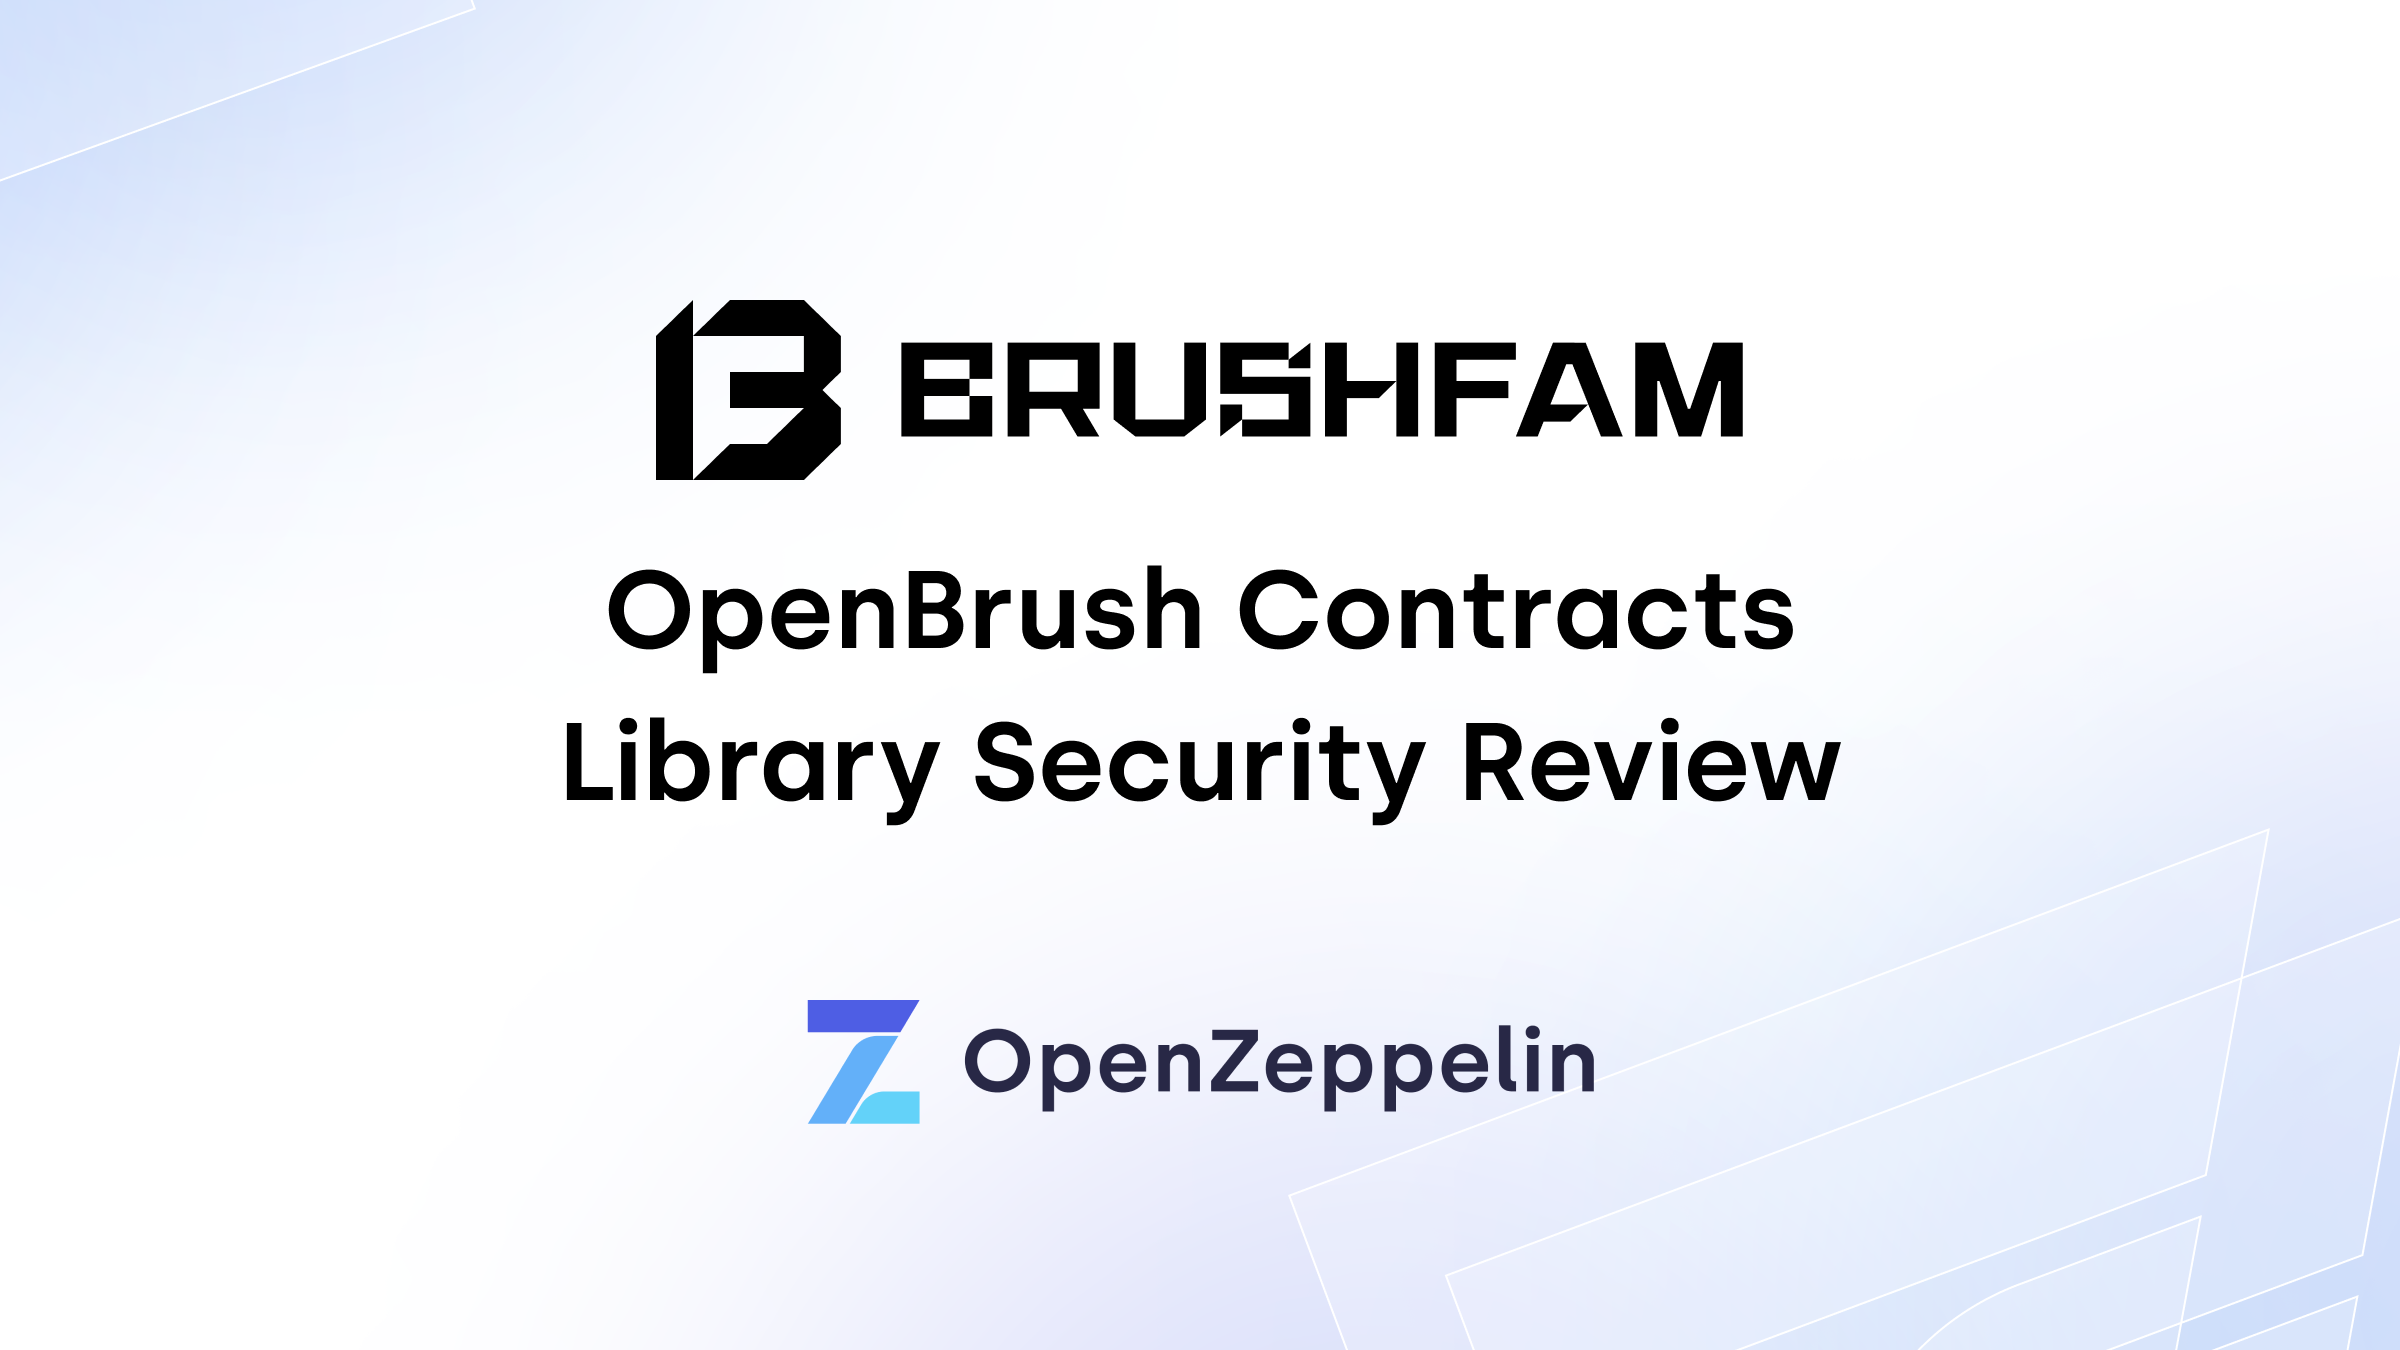 OpenBrush Contracts Library Security Review Featured Image